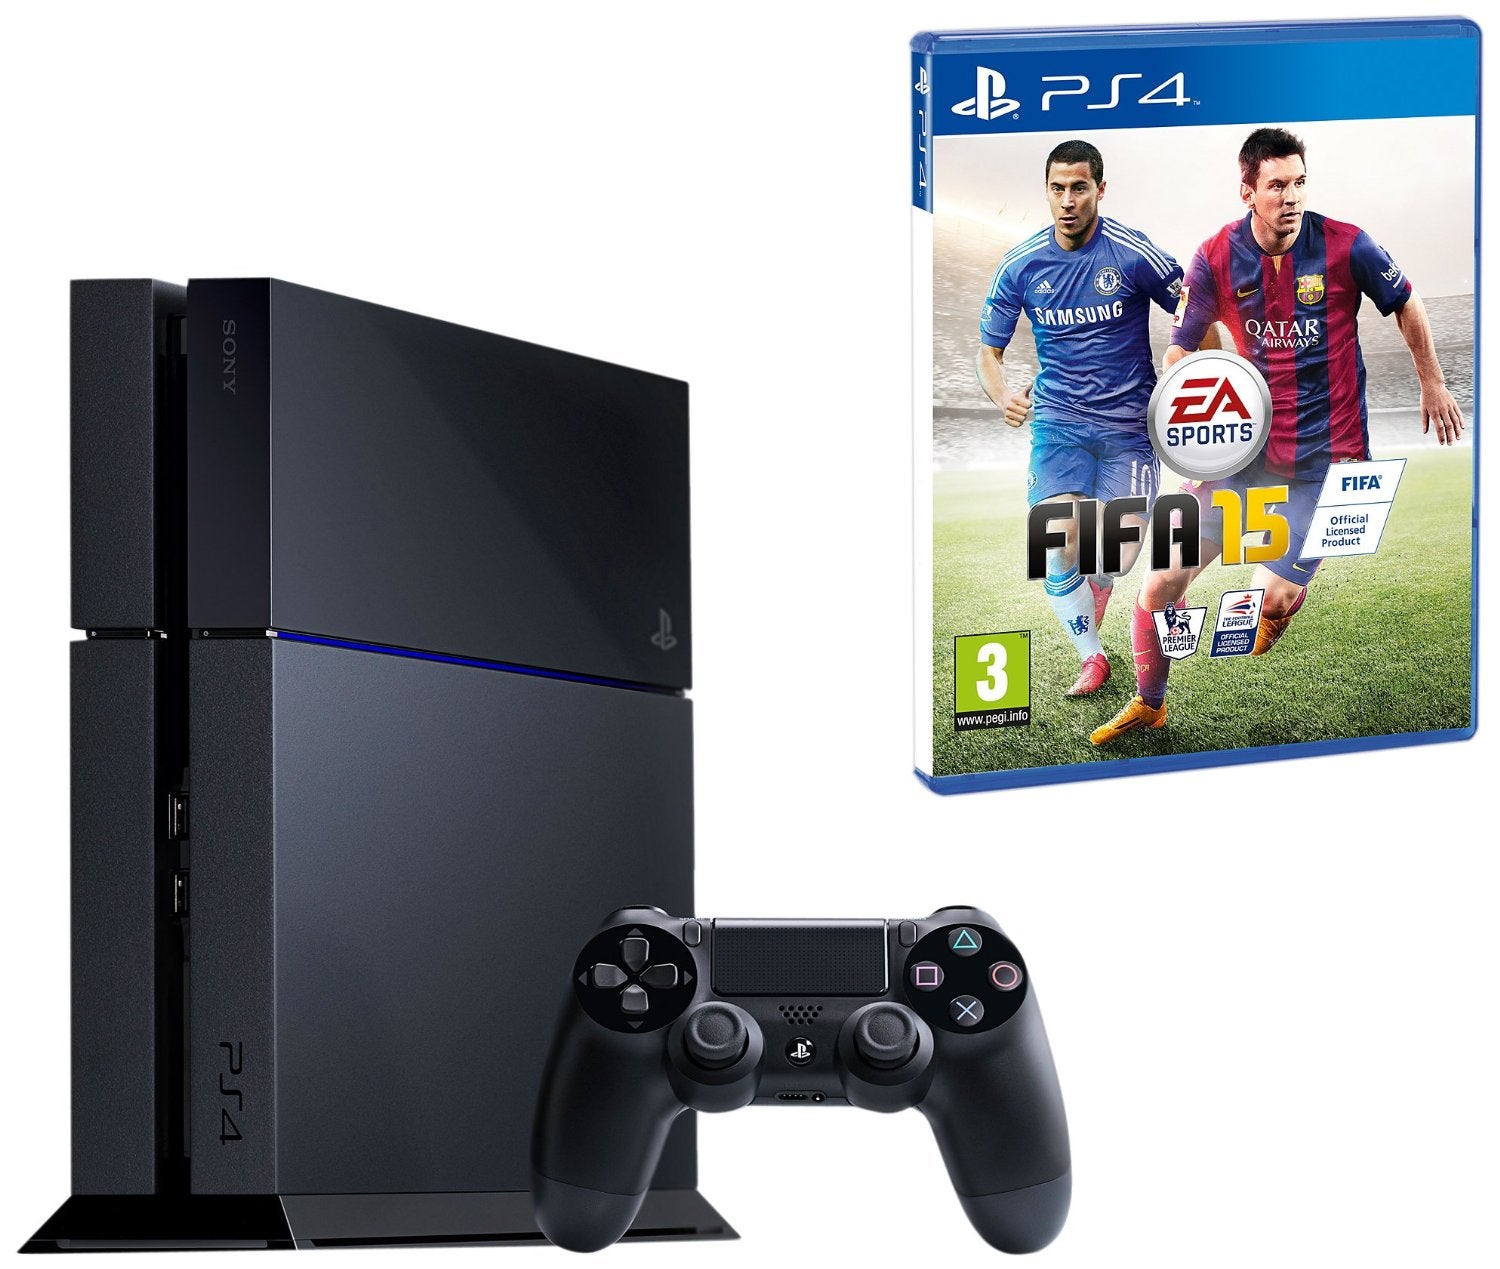 Image for Sony responds to Xbox One's price cut by offering PS4 + FIFA 15 for £330